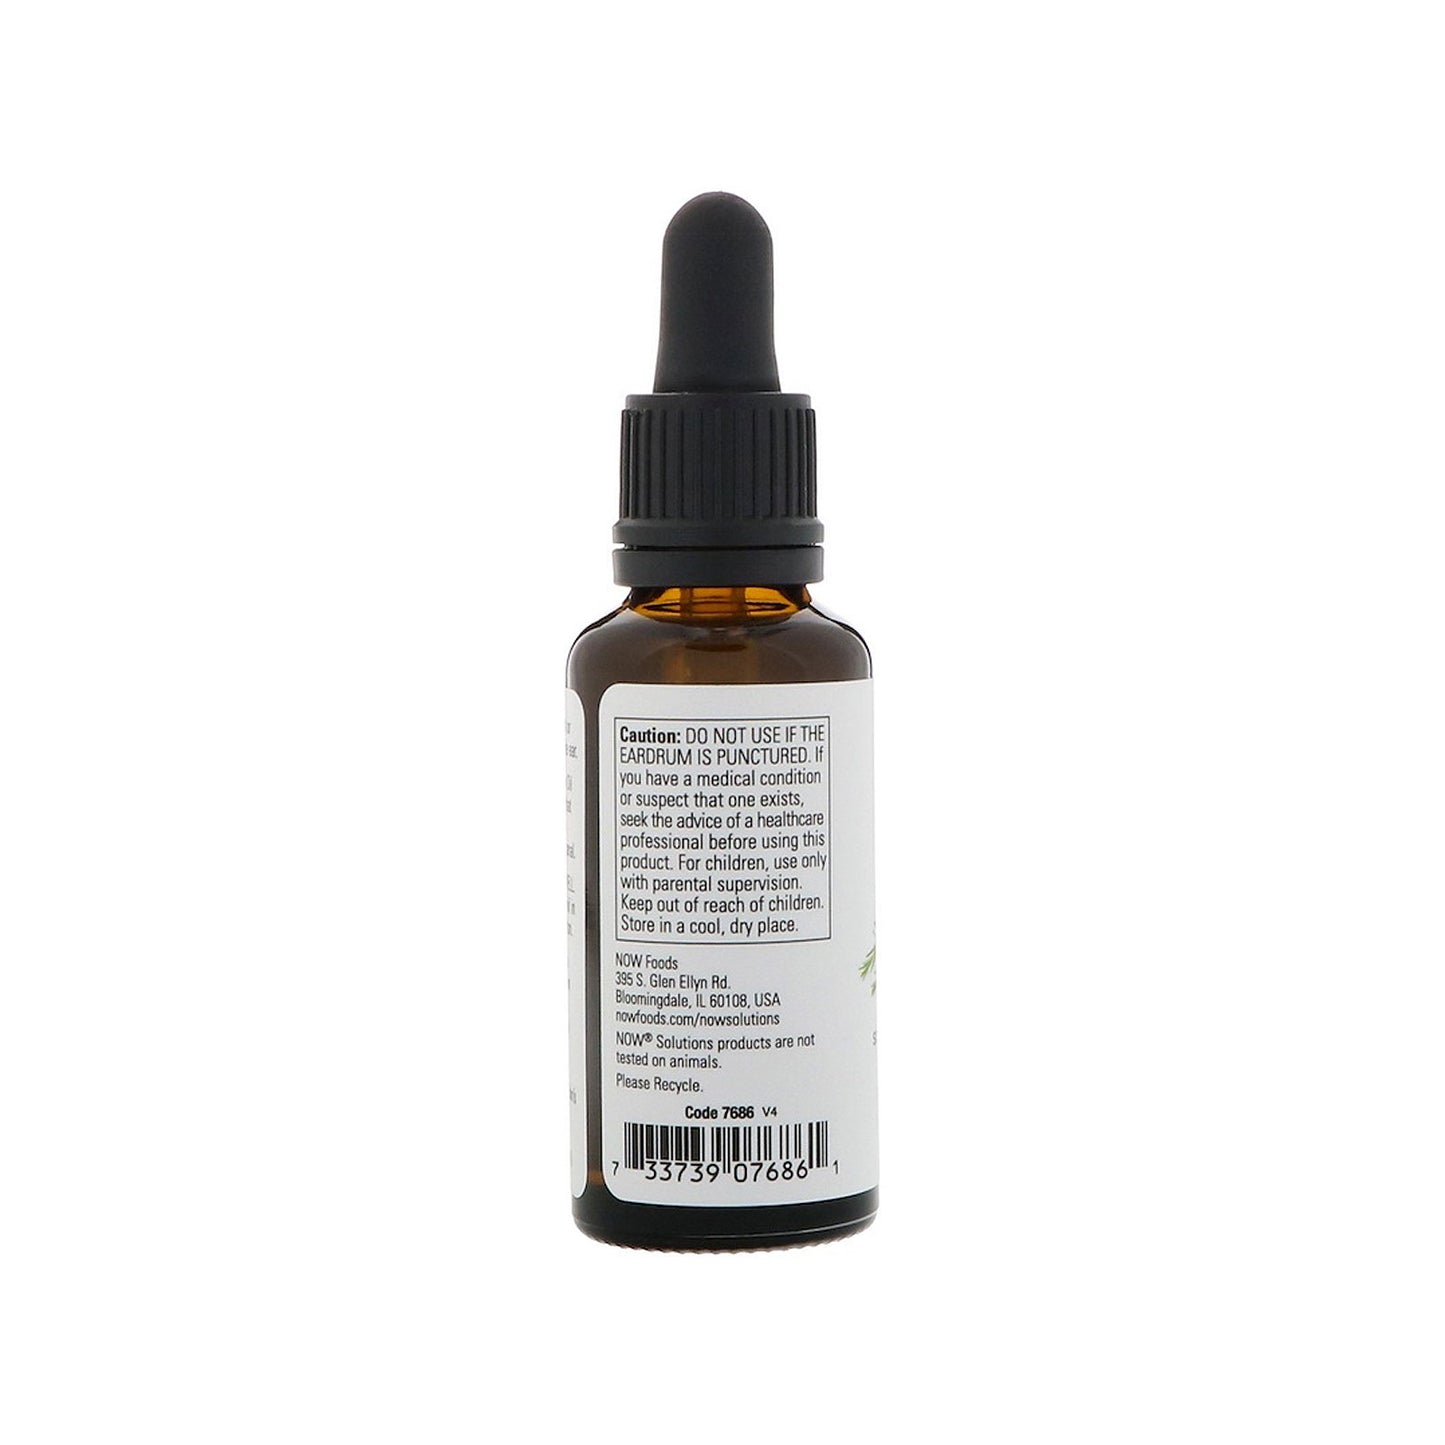 NOW Solutions, Ear Oil, Soothing Herbal Blend, Great on Mild Discomfort or Irritation, 1-Ounce (30 ml)